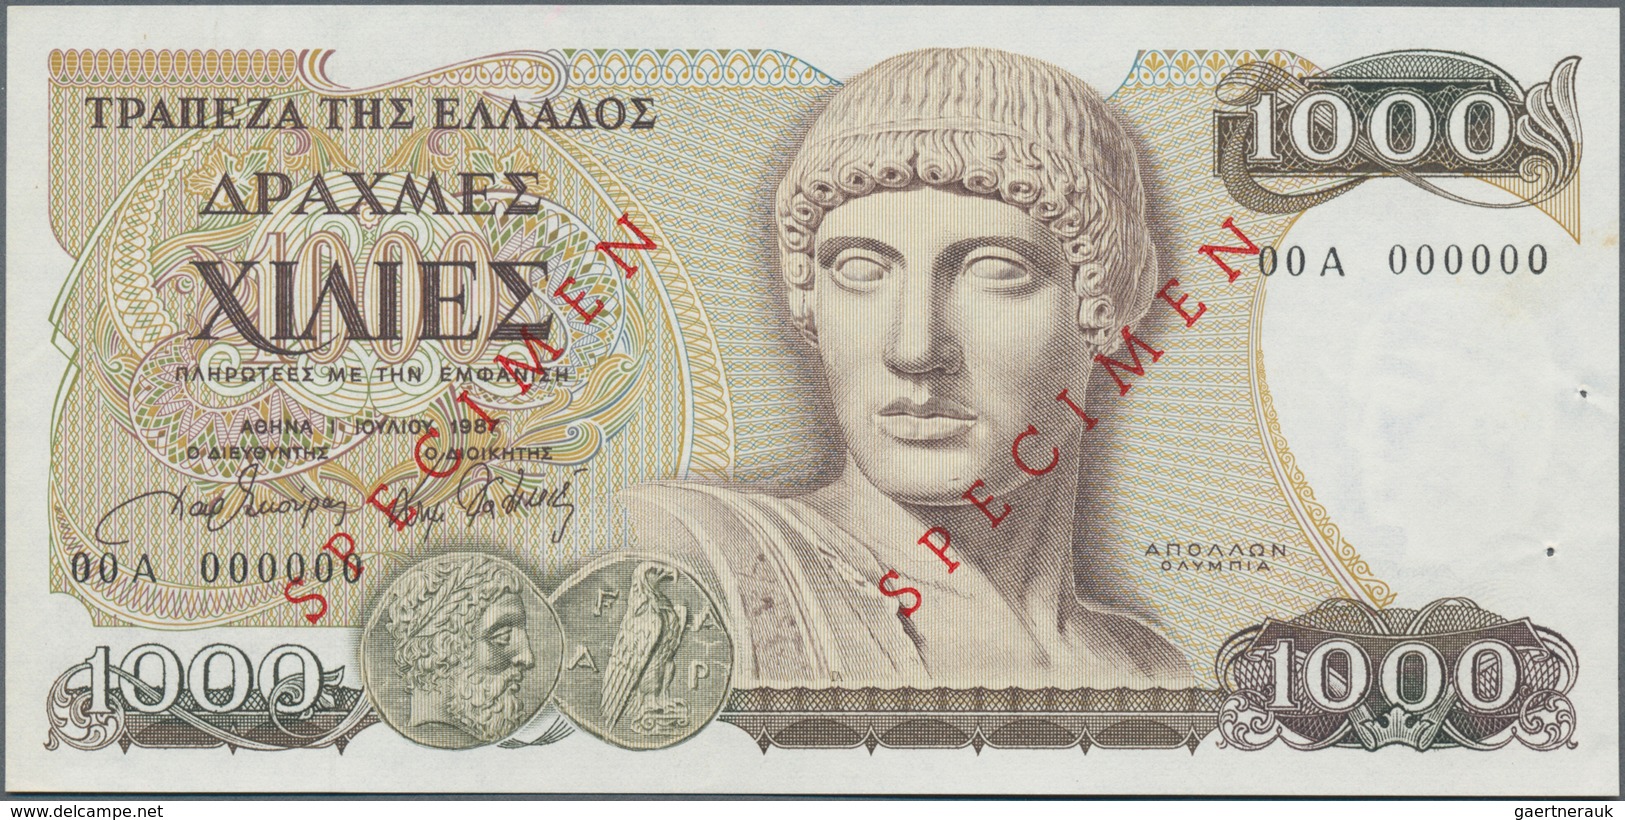 Greece / Griechenland: 1000 Drachmai 1987 SPECIMEN, P.202s, Serial Number 00A 000000 And Red Overpri - Grèce